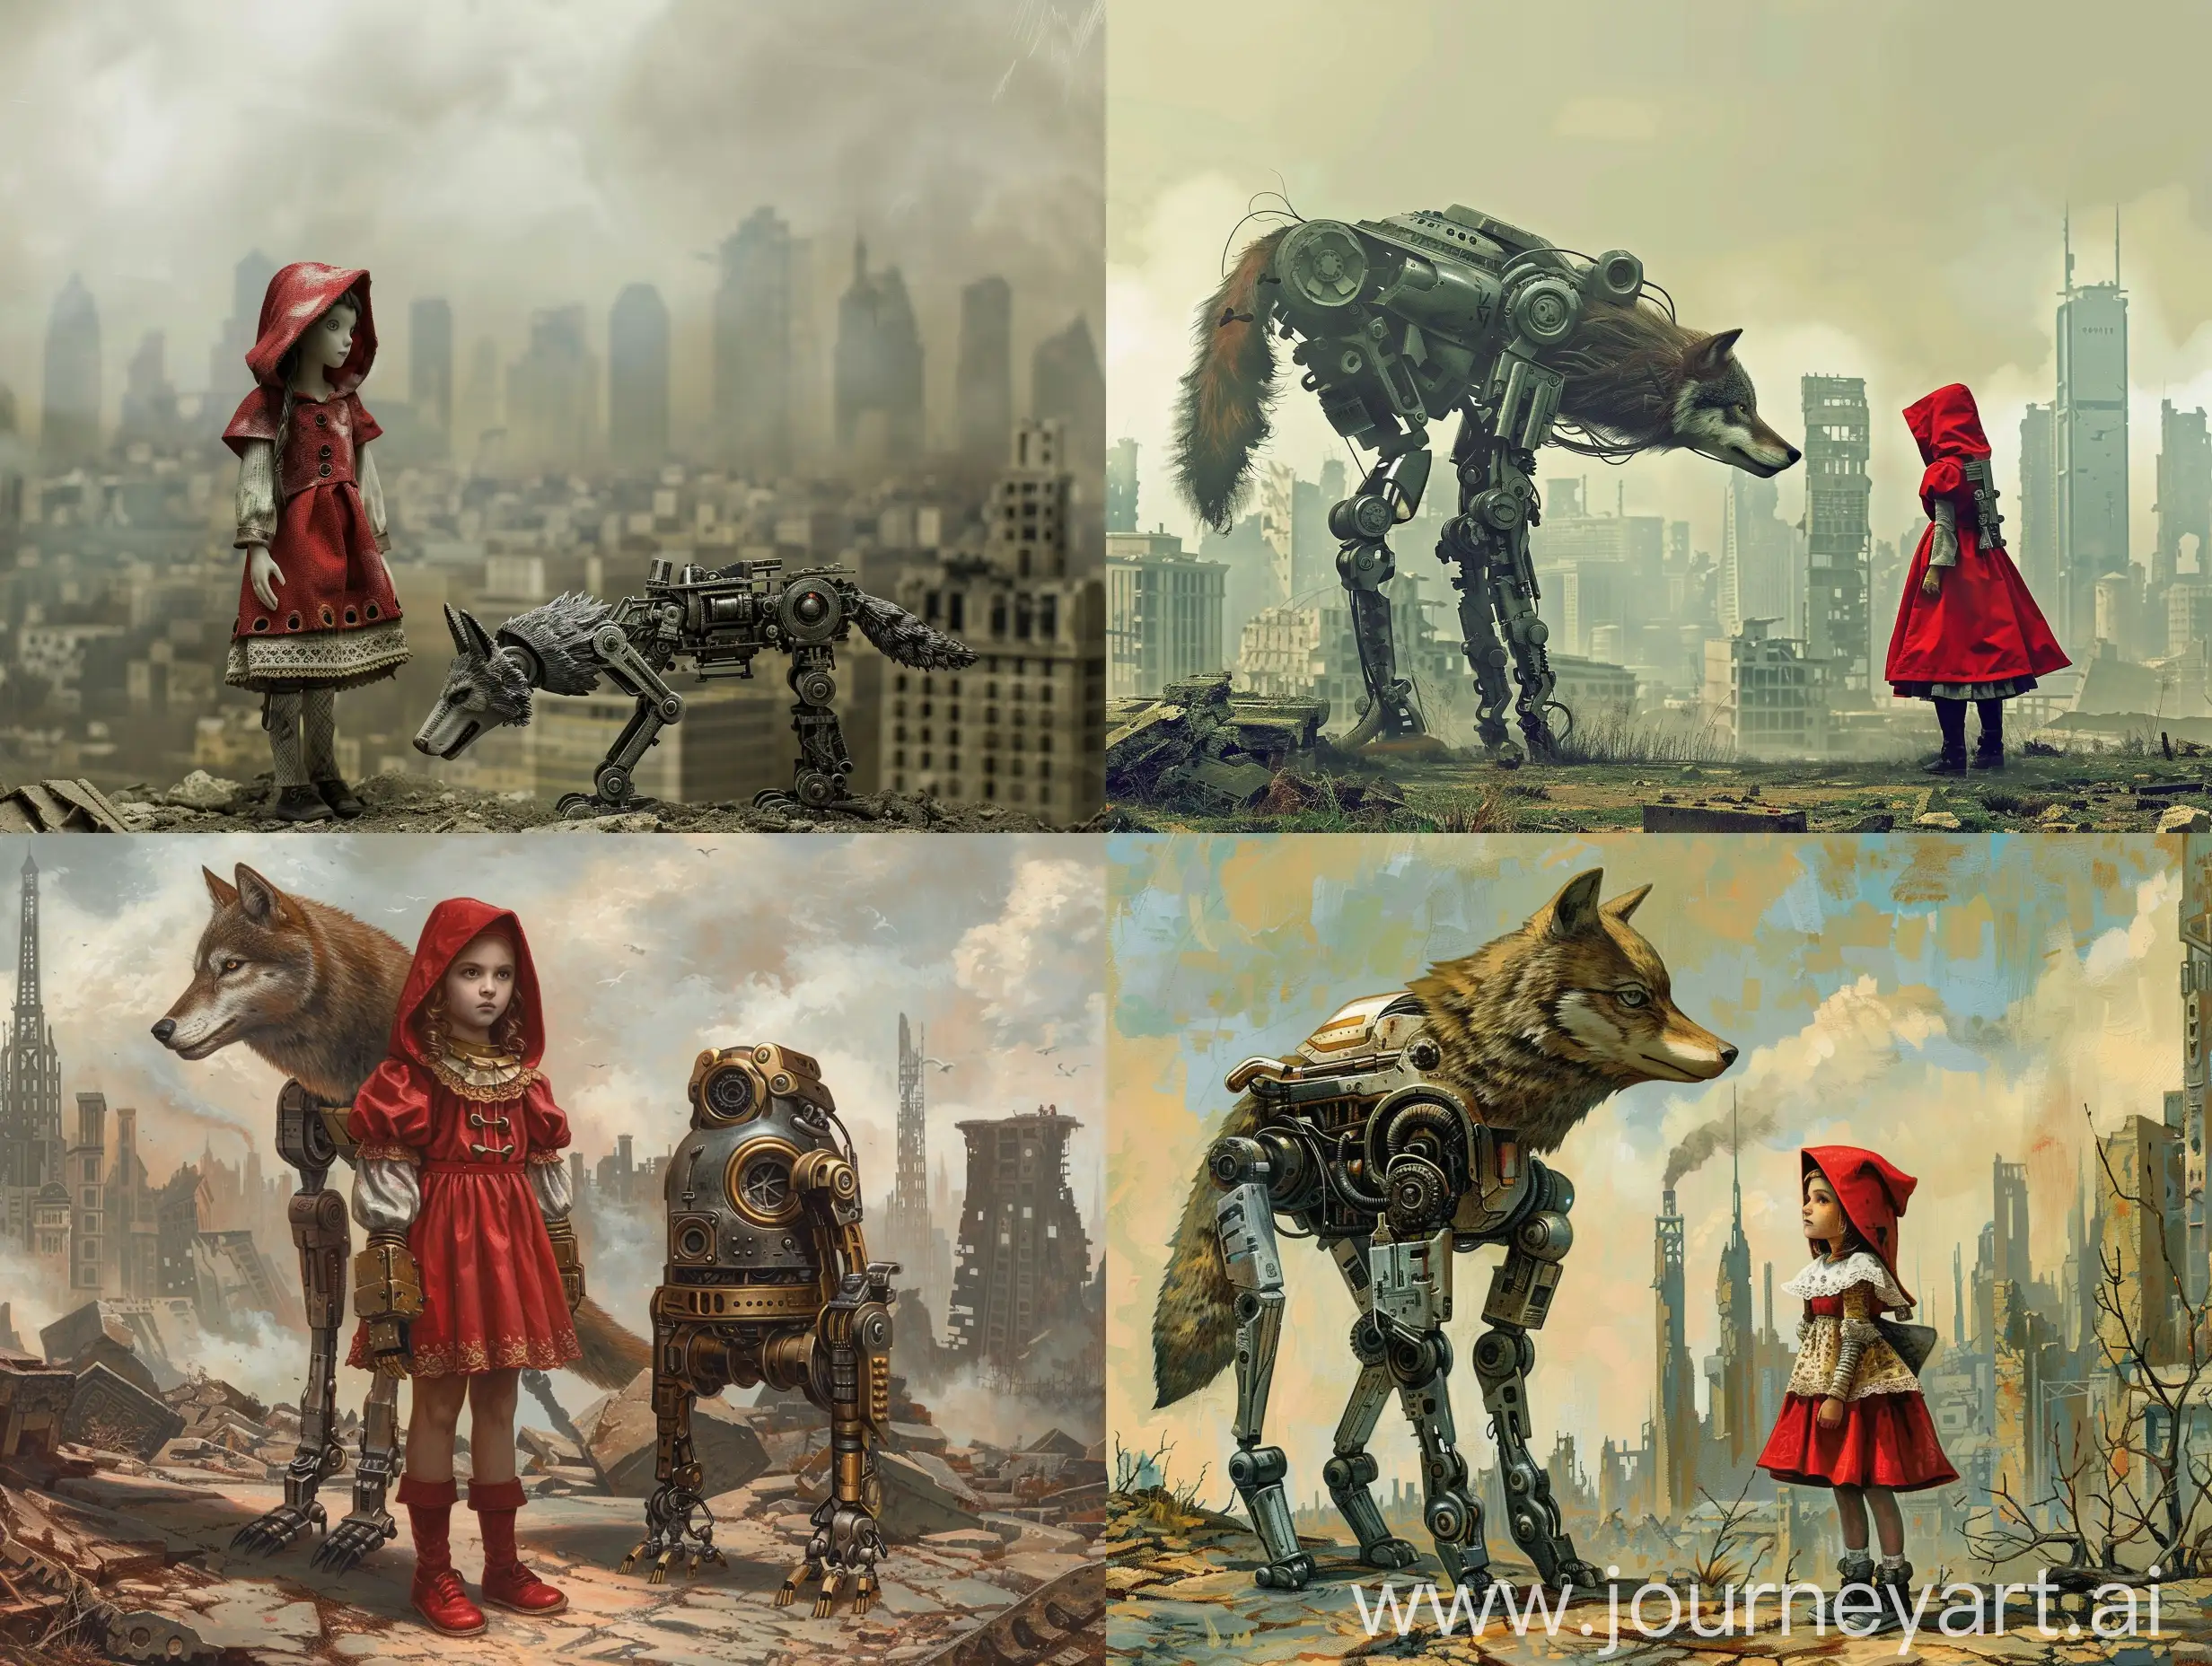 Little-Red-Riding-Hood-Confronts-Robot-Wolf-in-PostApocalyptic-City-Ruins